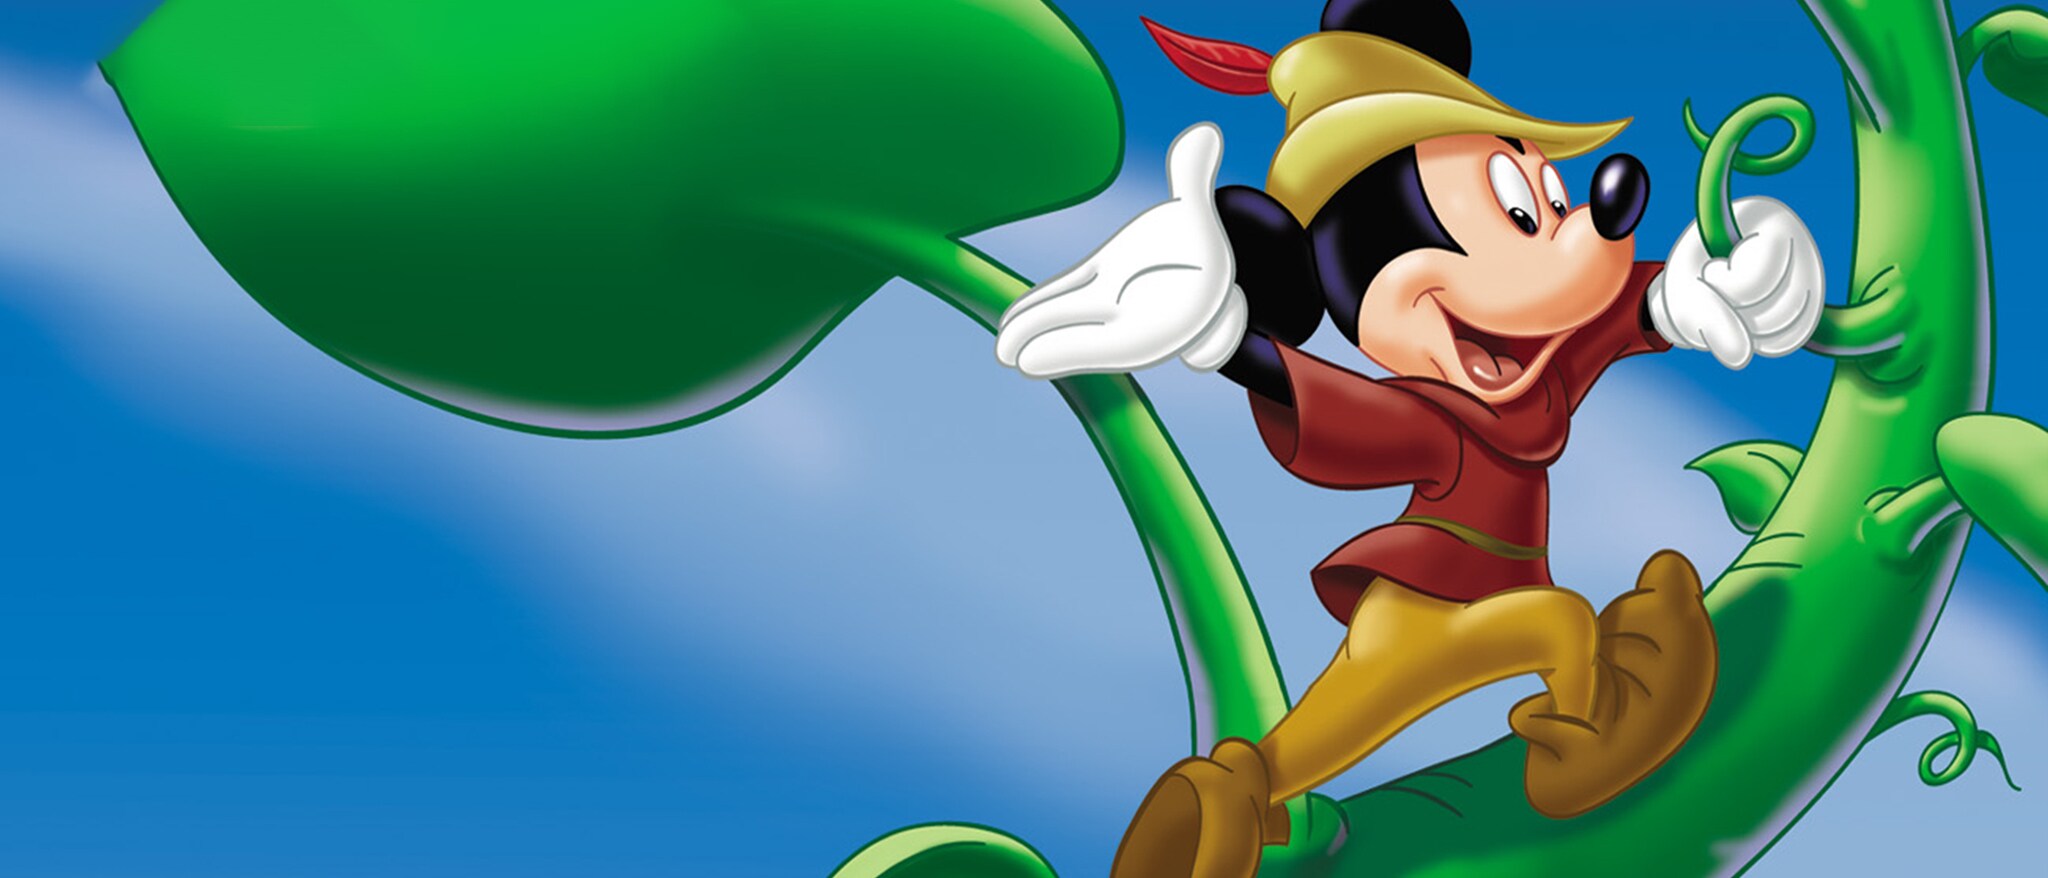 Disney Learning Adventures: Mickey And The Beanstalk Hero